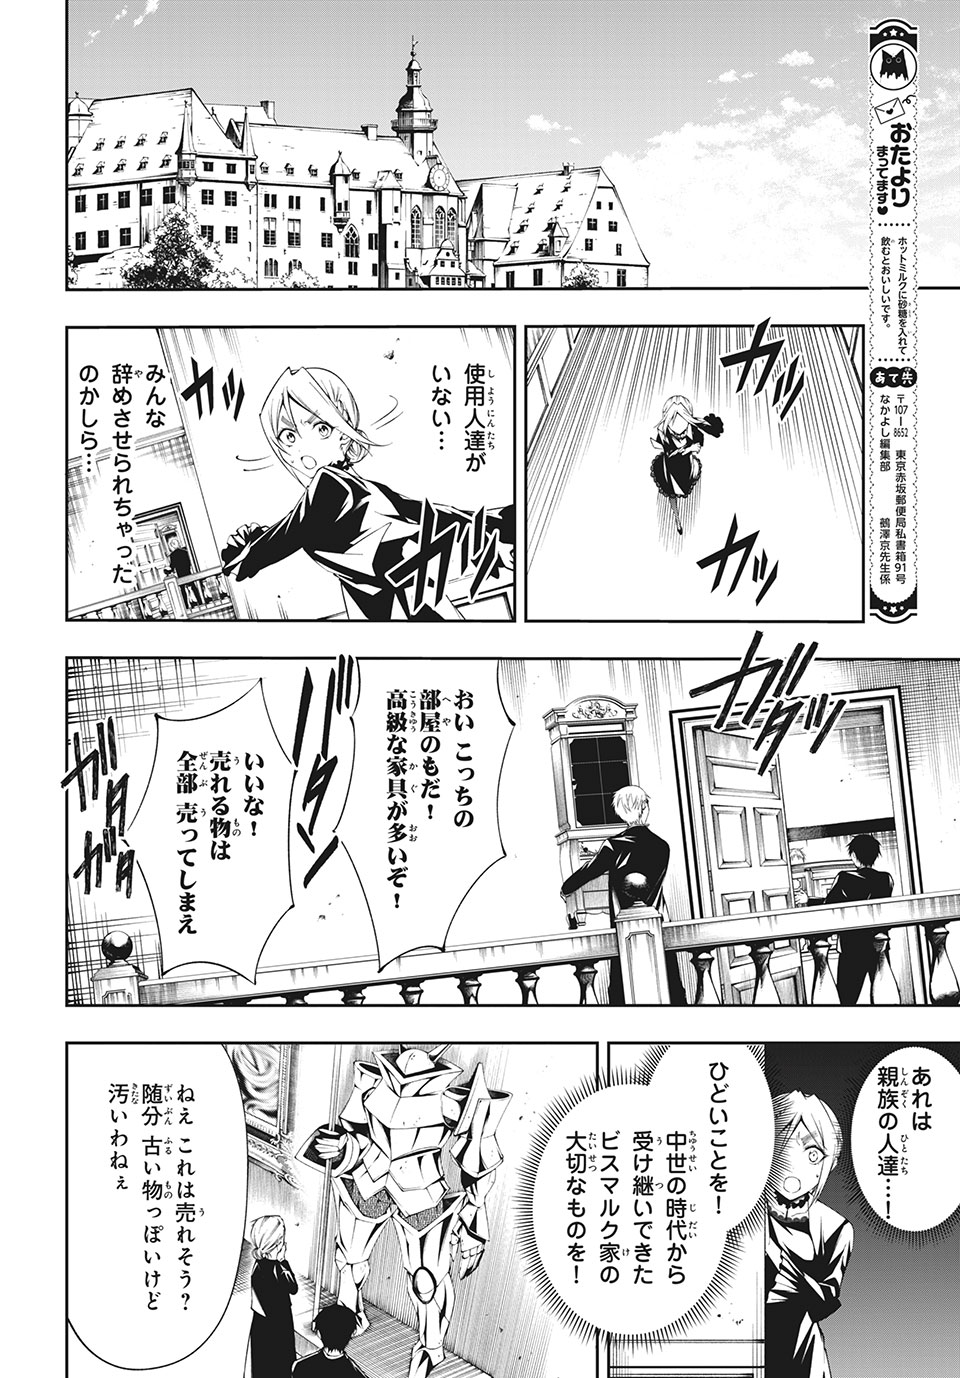 Shaman King: and a garden 第4.1話 - Page 10